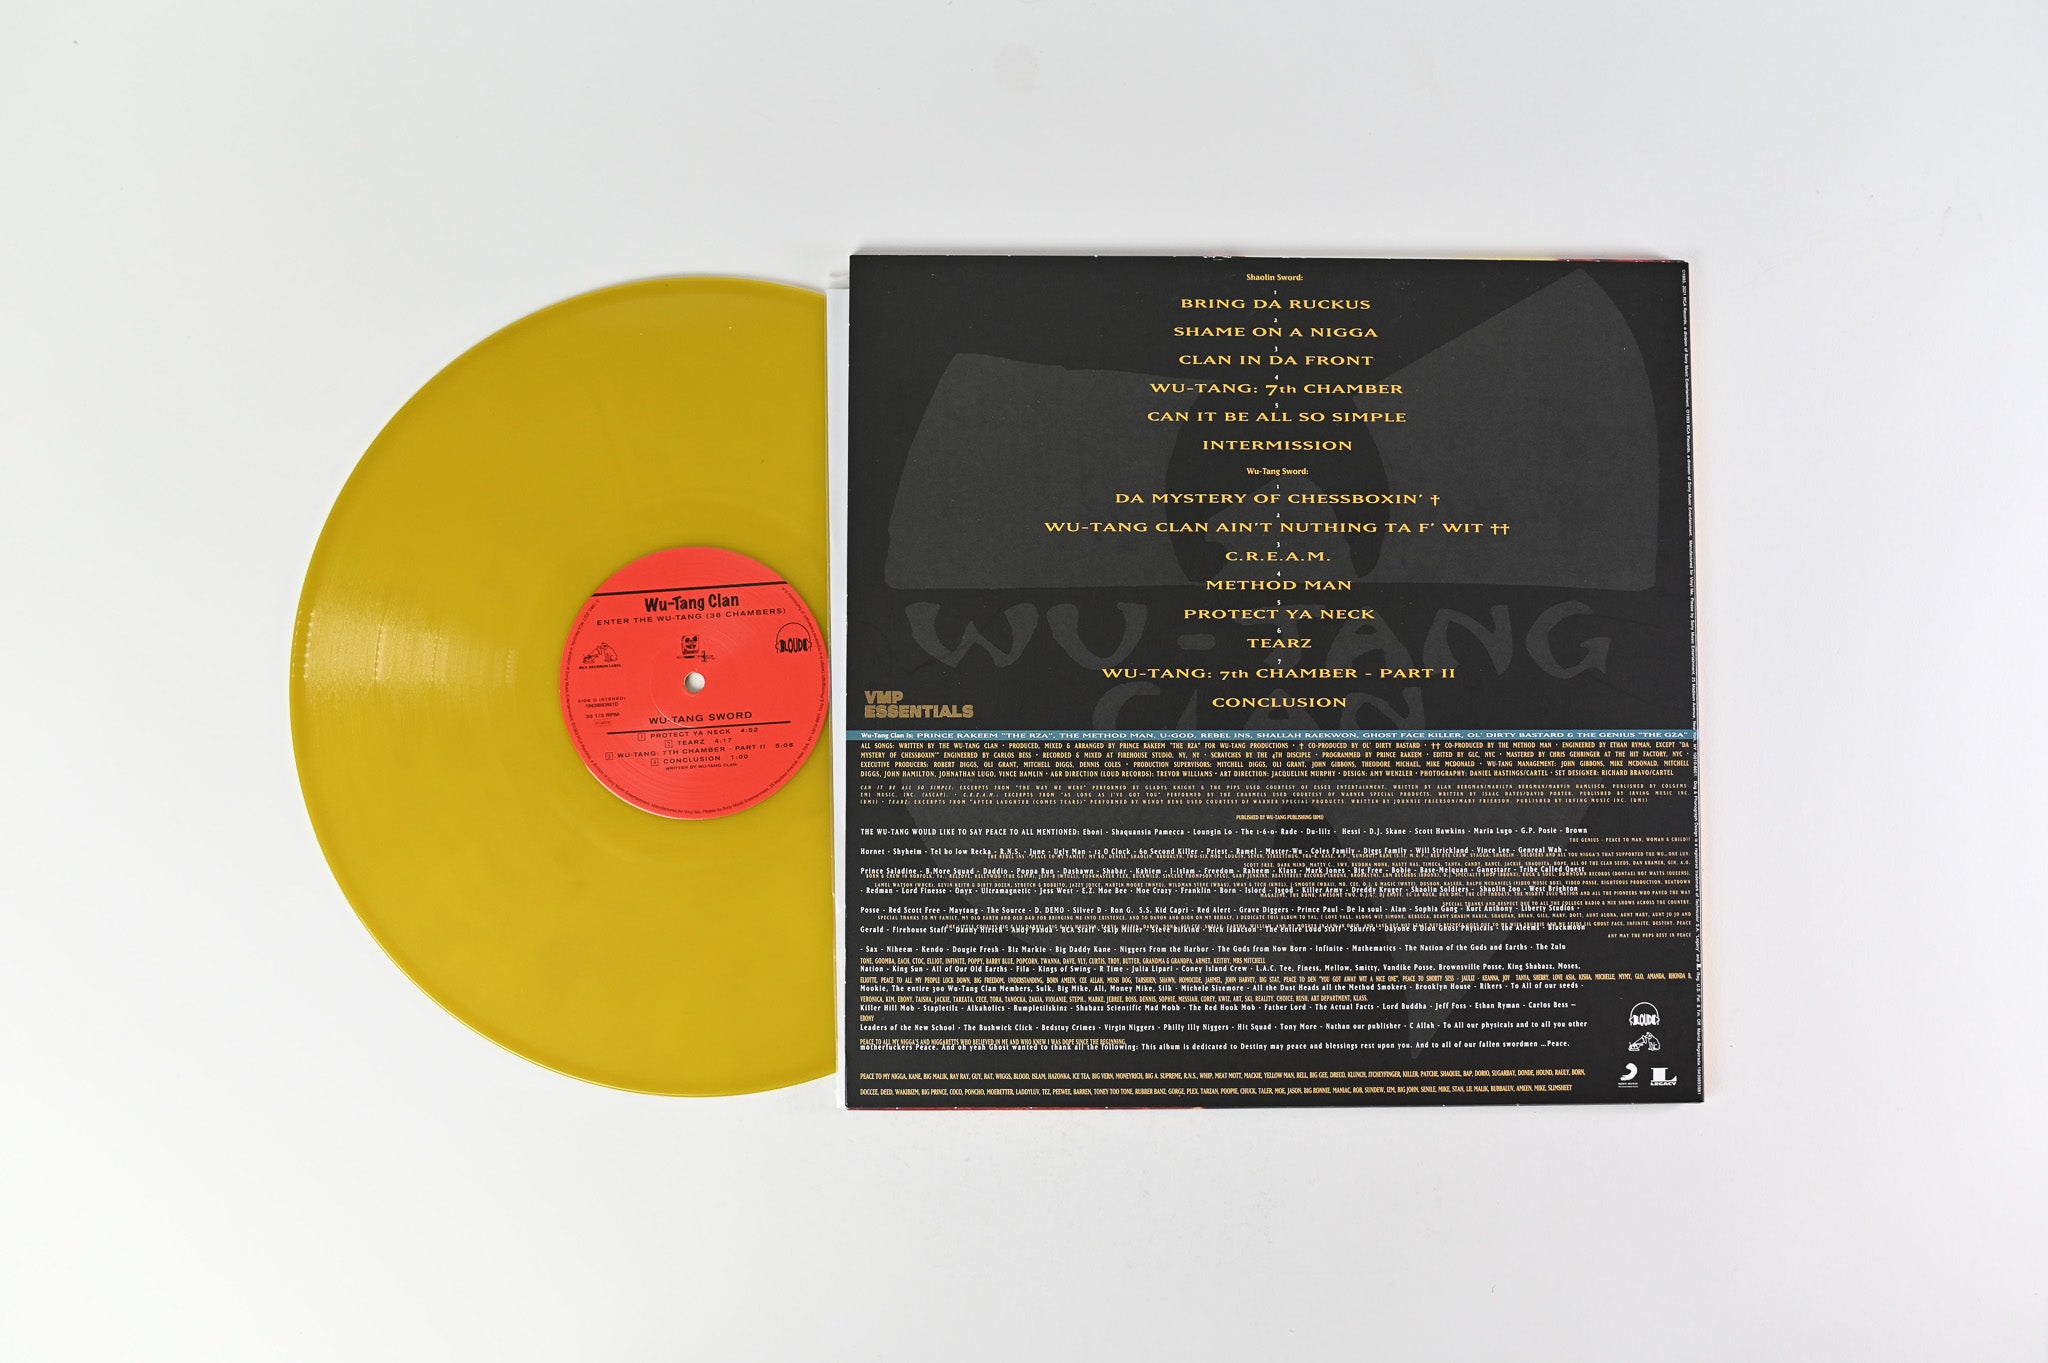 Wu-Tang Clan - Enter The Wu-Tang (36 Chambers) Vinyl Me Please Gold Galaxy Reissue